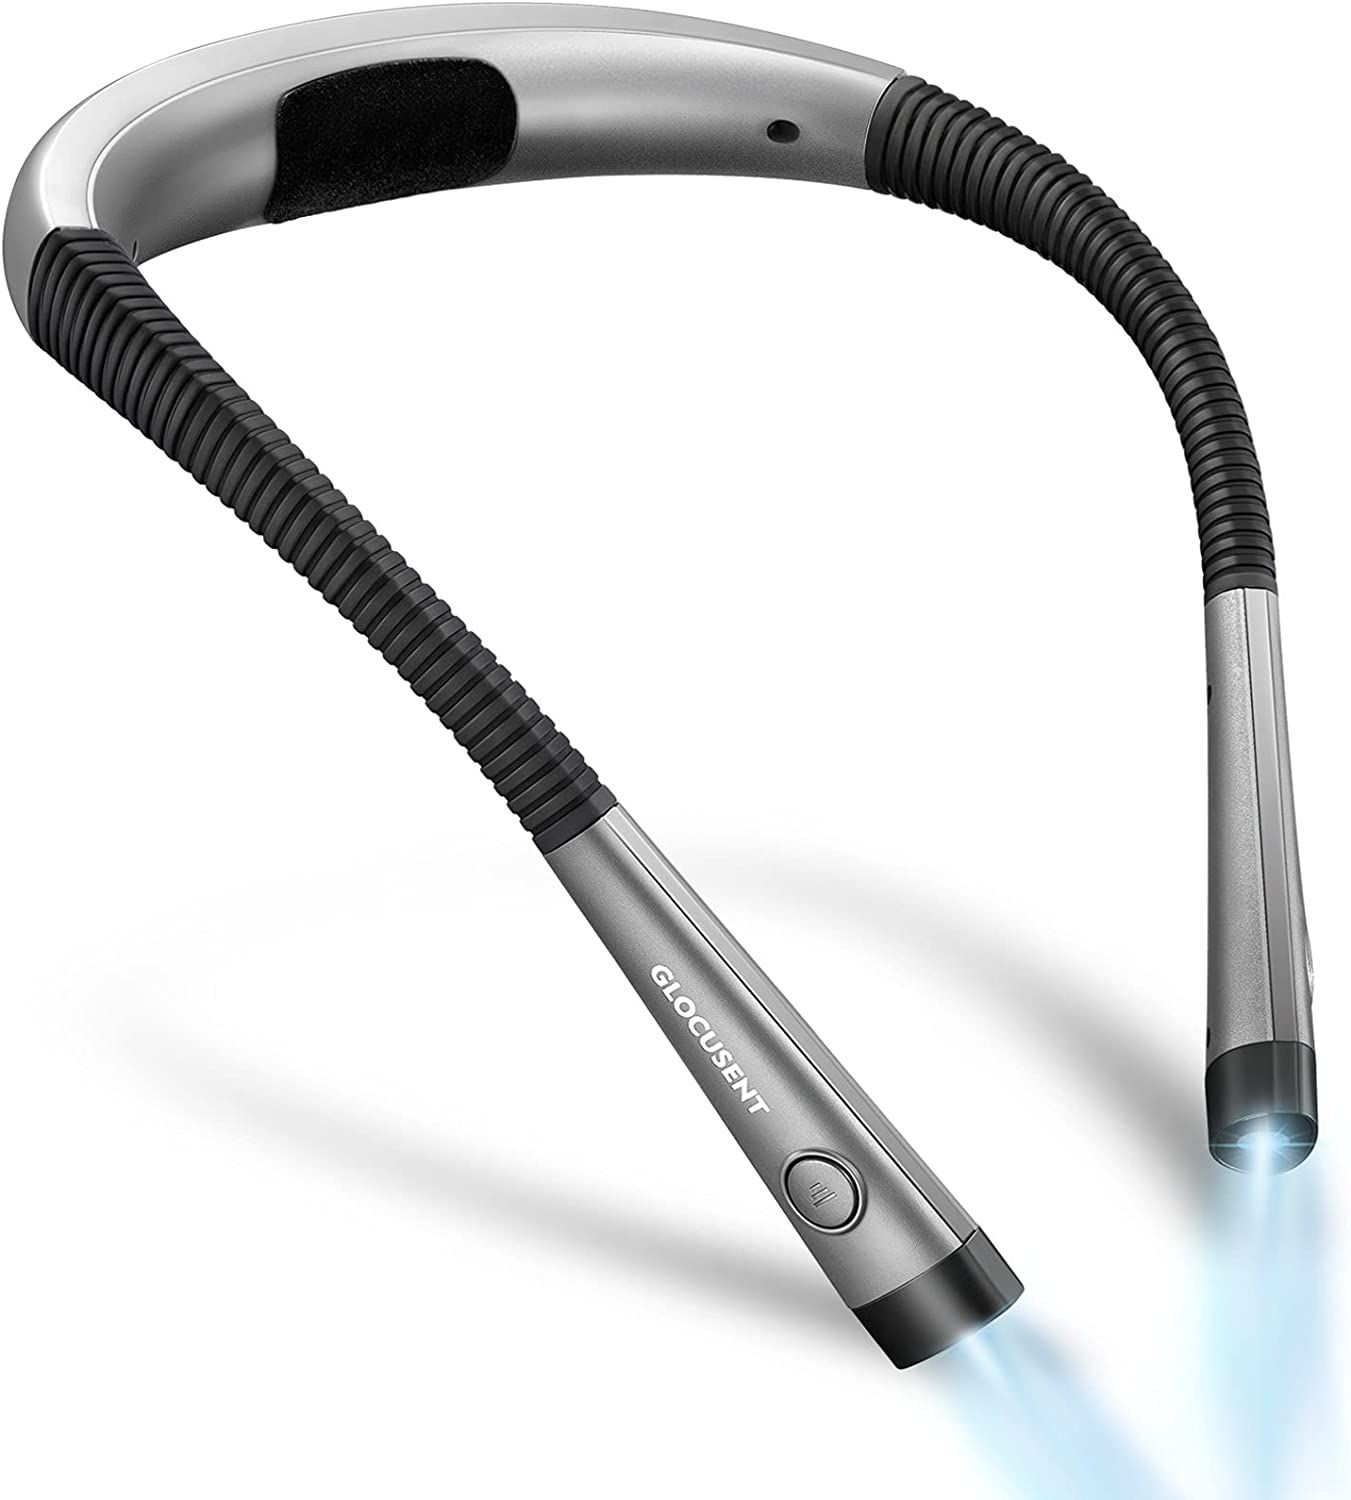 A black and silver U-shaped device with two lights shining out of the tips, designed to sit around the neck